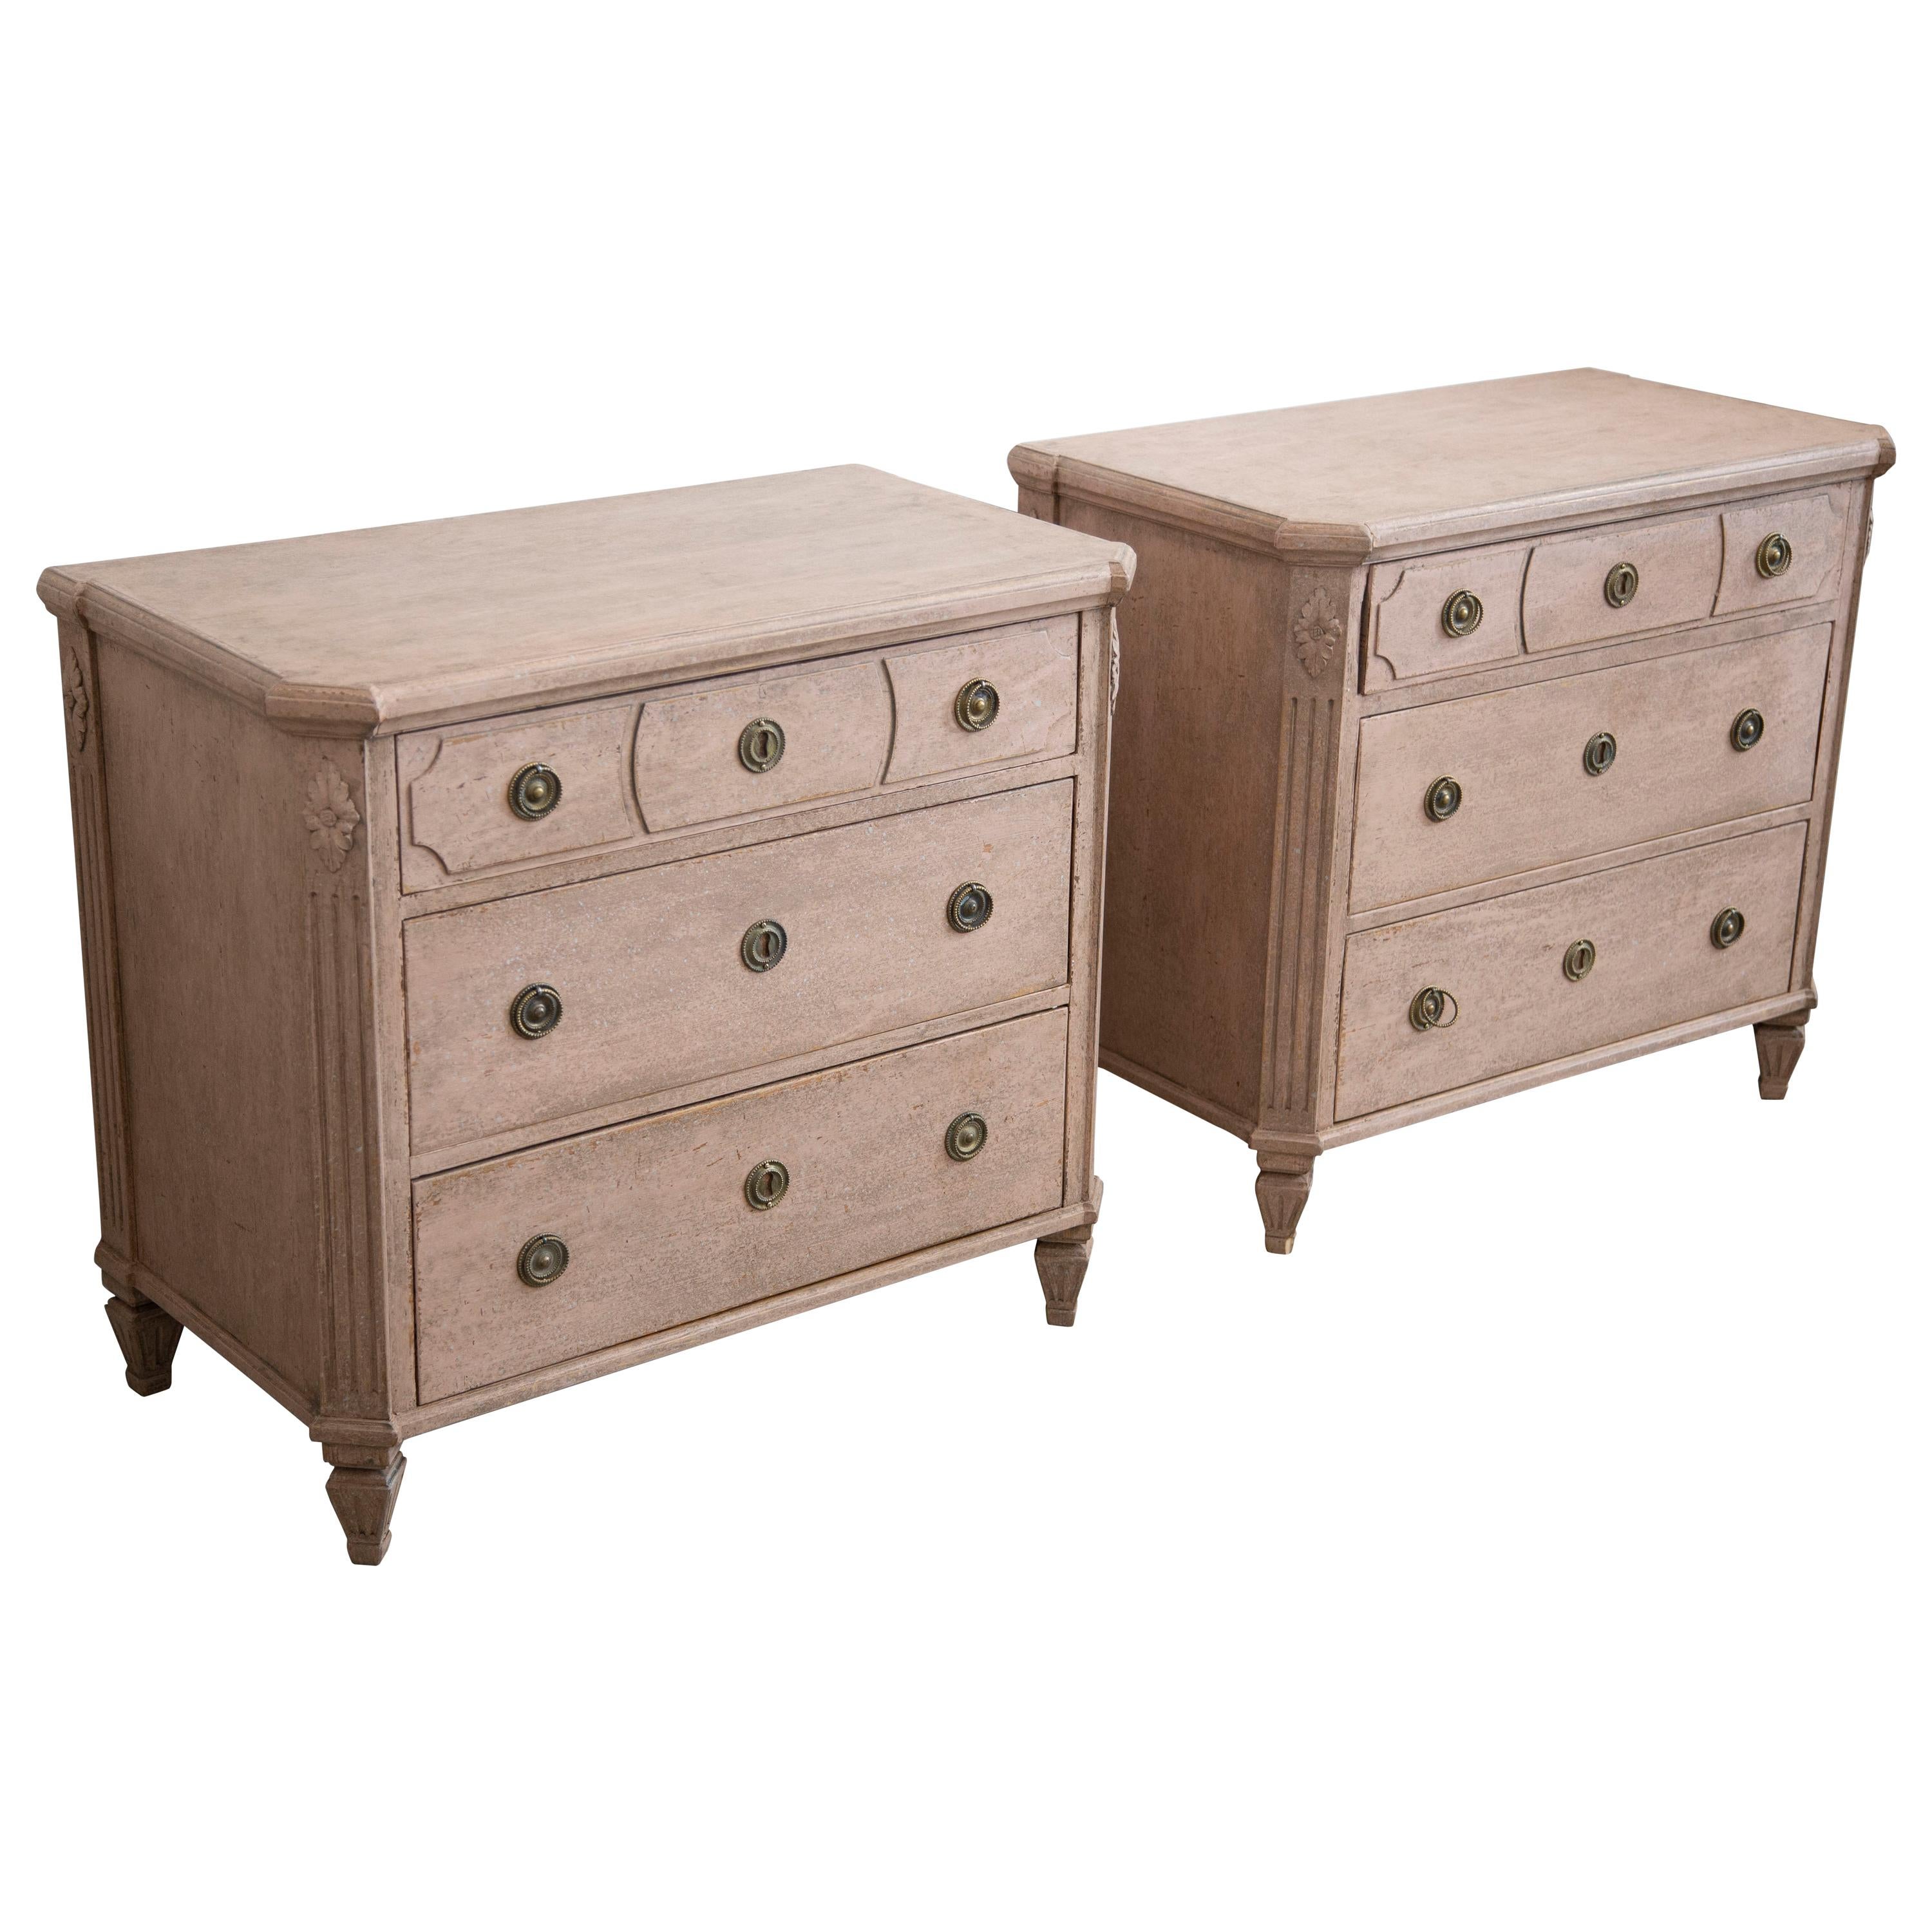 Pair of Antique Swedish Gustavian Style Rose Painted Chests, Late 19th Century For Sale